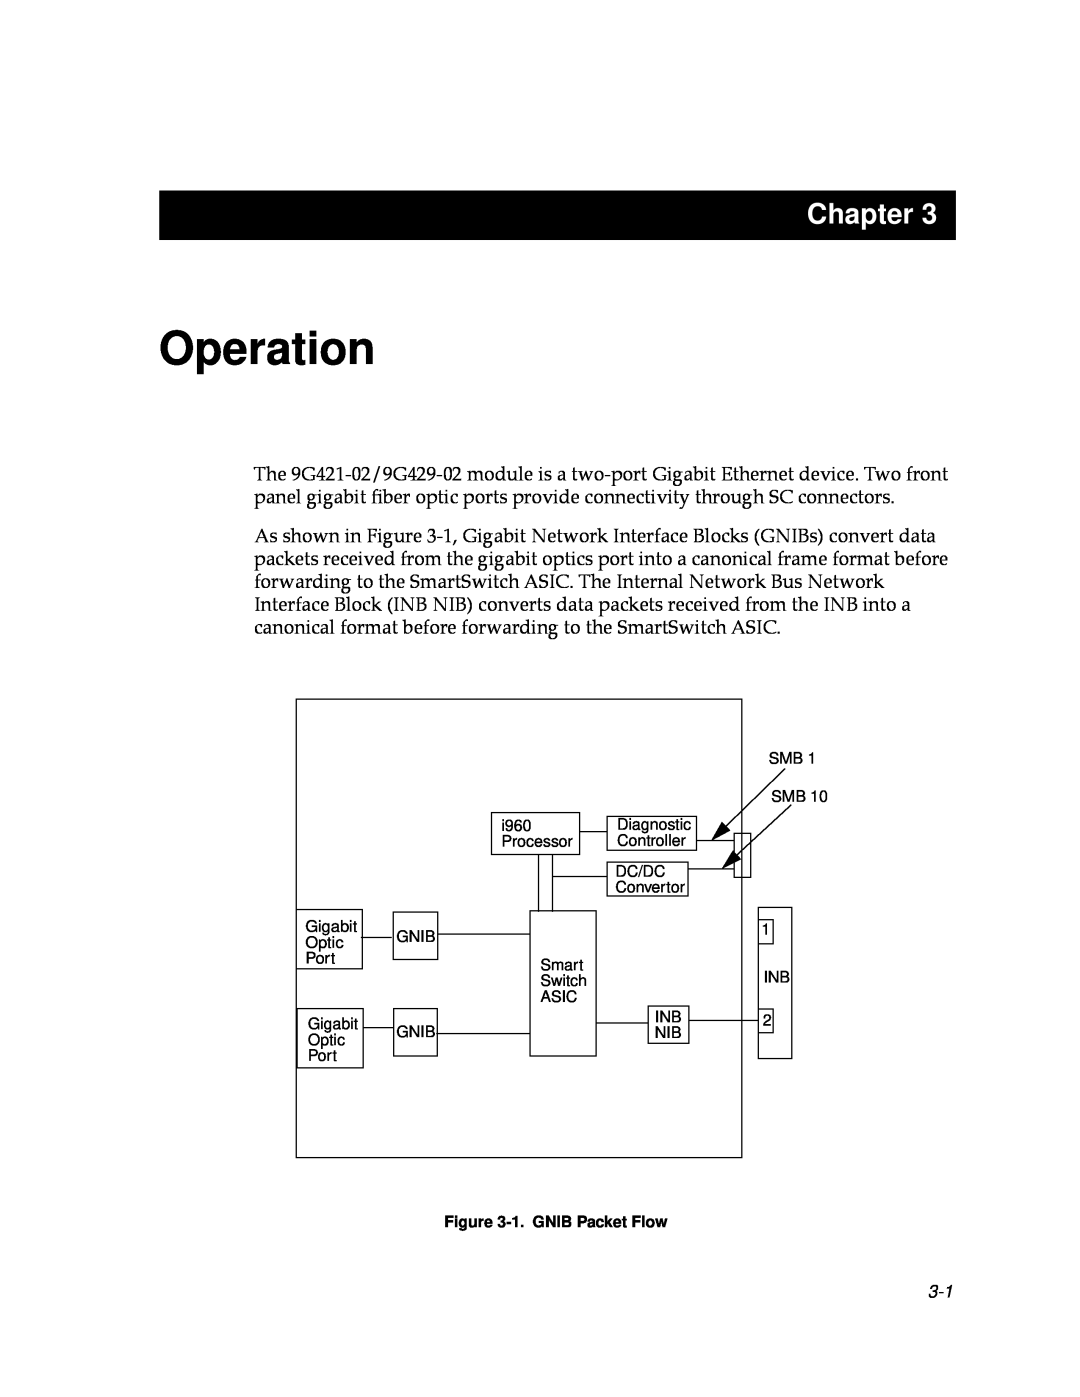 Cabletron Systems 9000 manual Operation, Chapter, 1. GNIB Packet Flow 